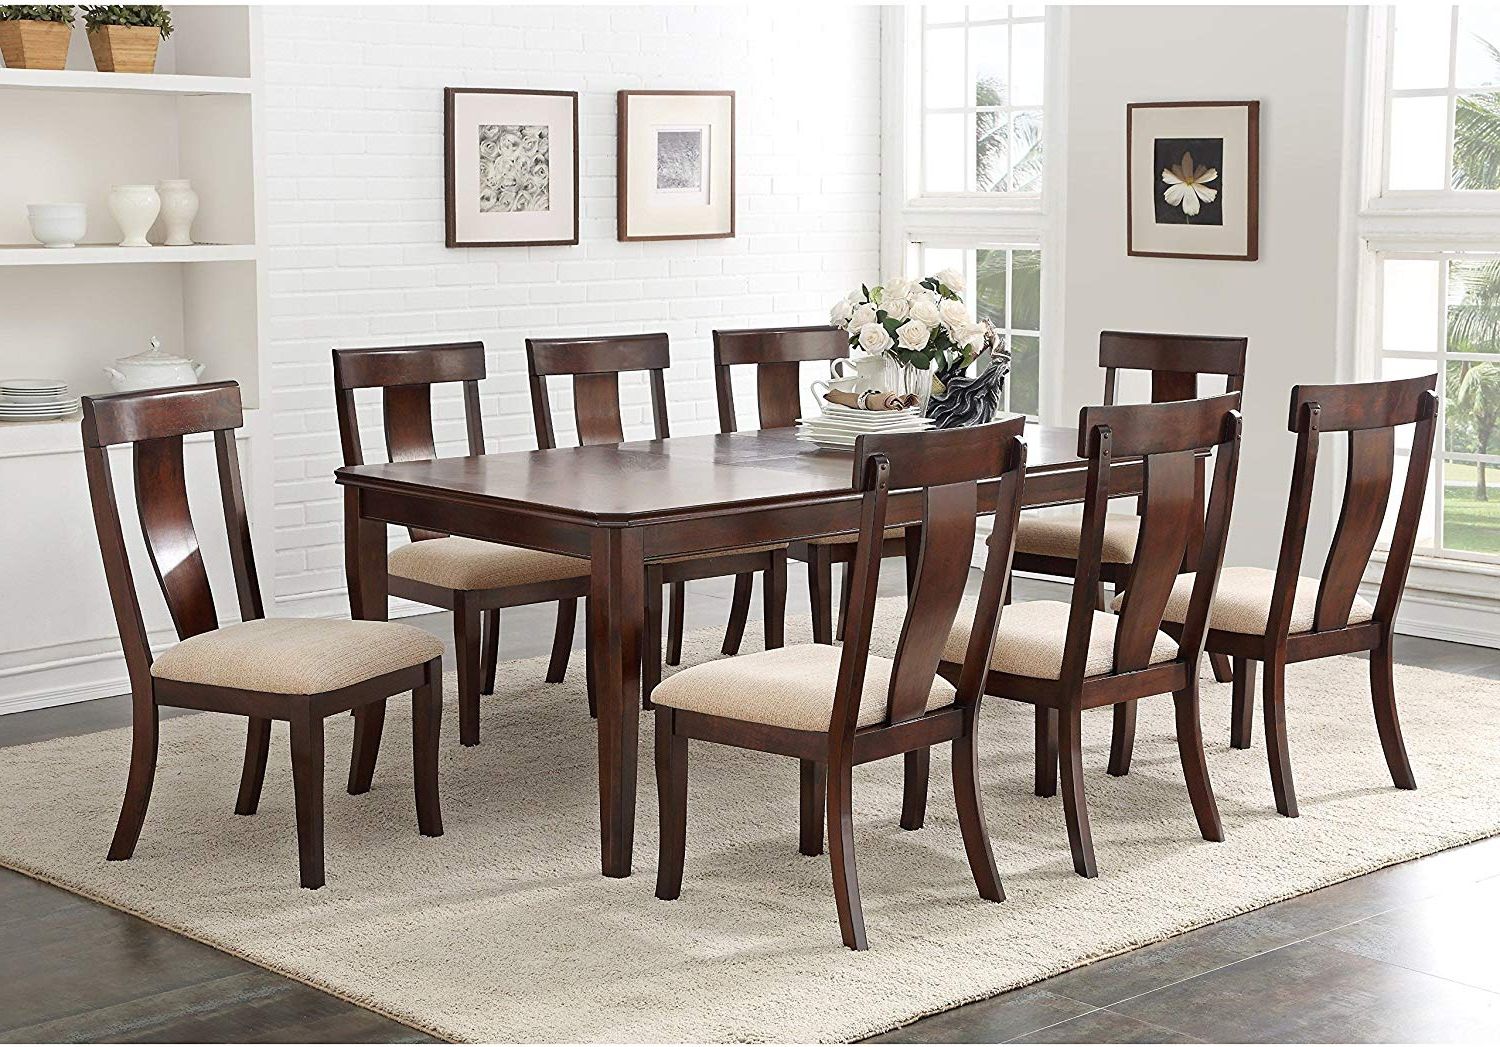 Contemporary Dining Room Set 8 Chairs